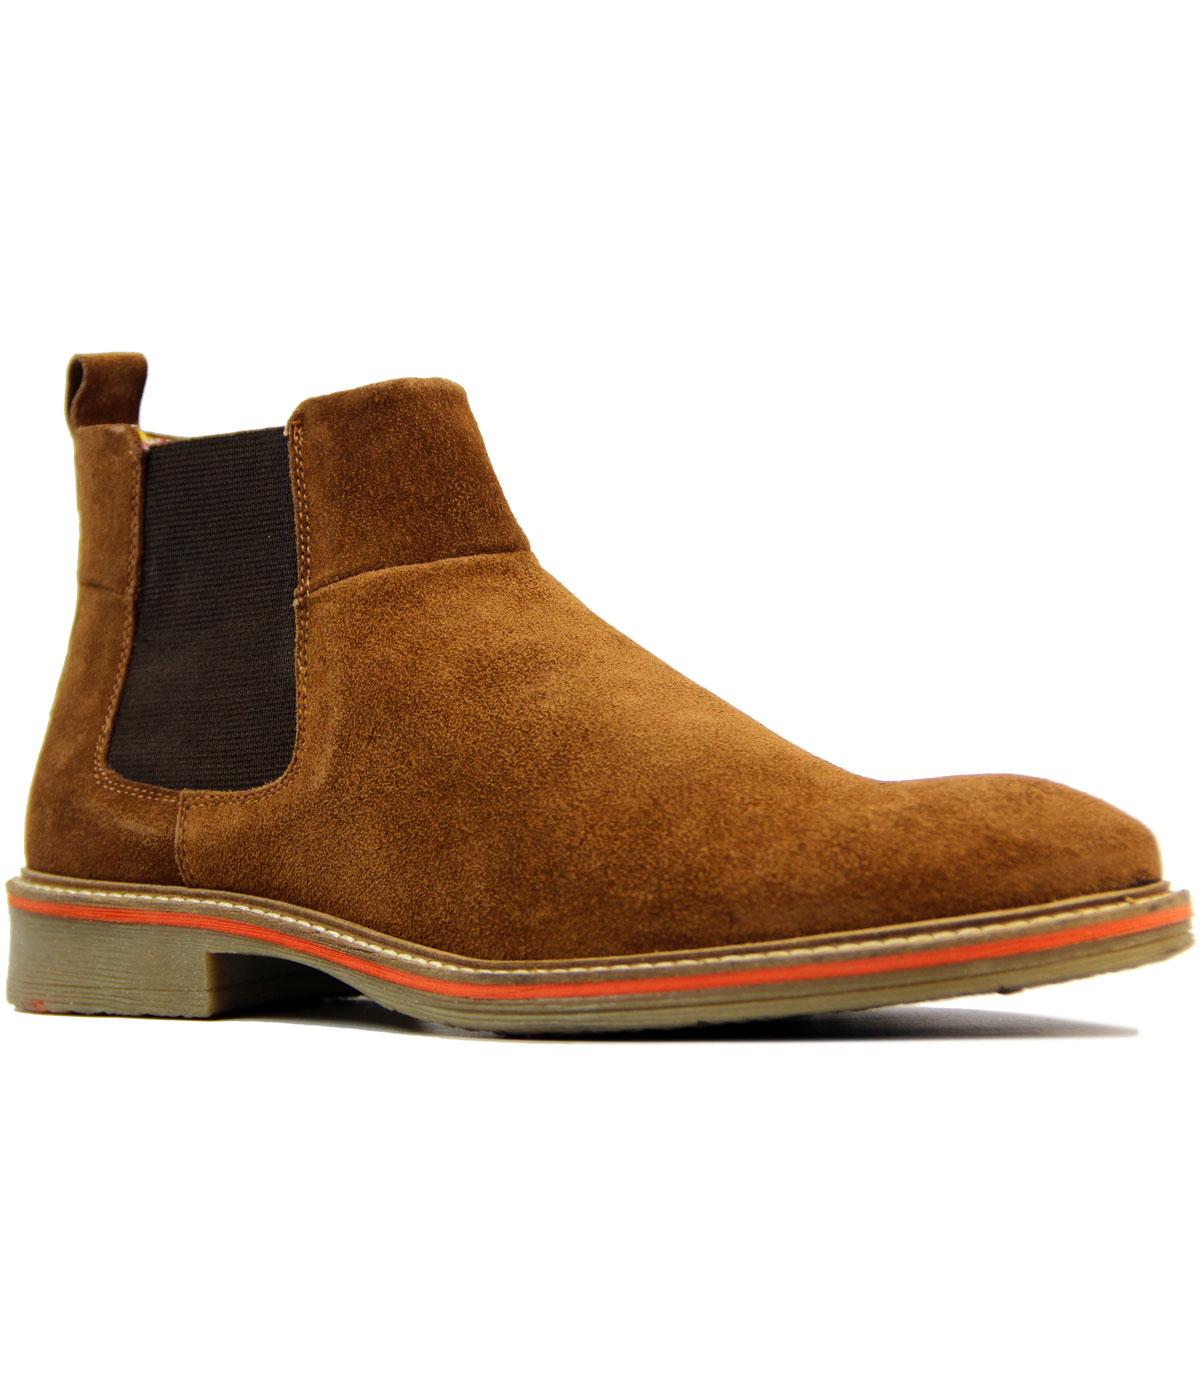 Retro 1960s Mod Suede Tipped Colour Chelsea Boots